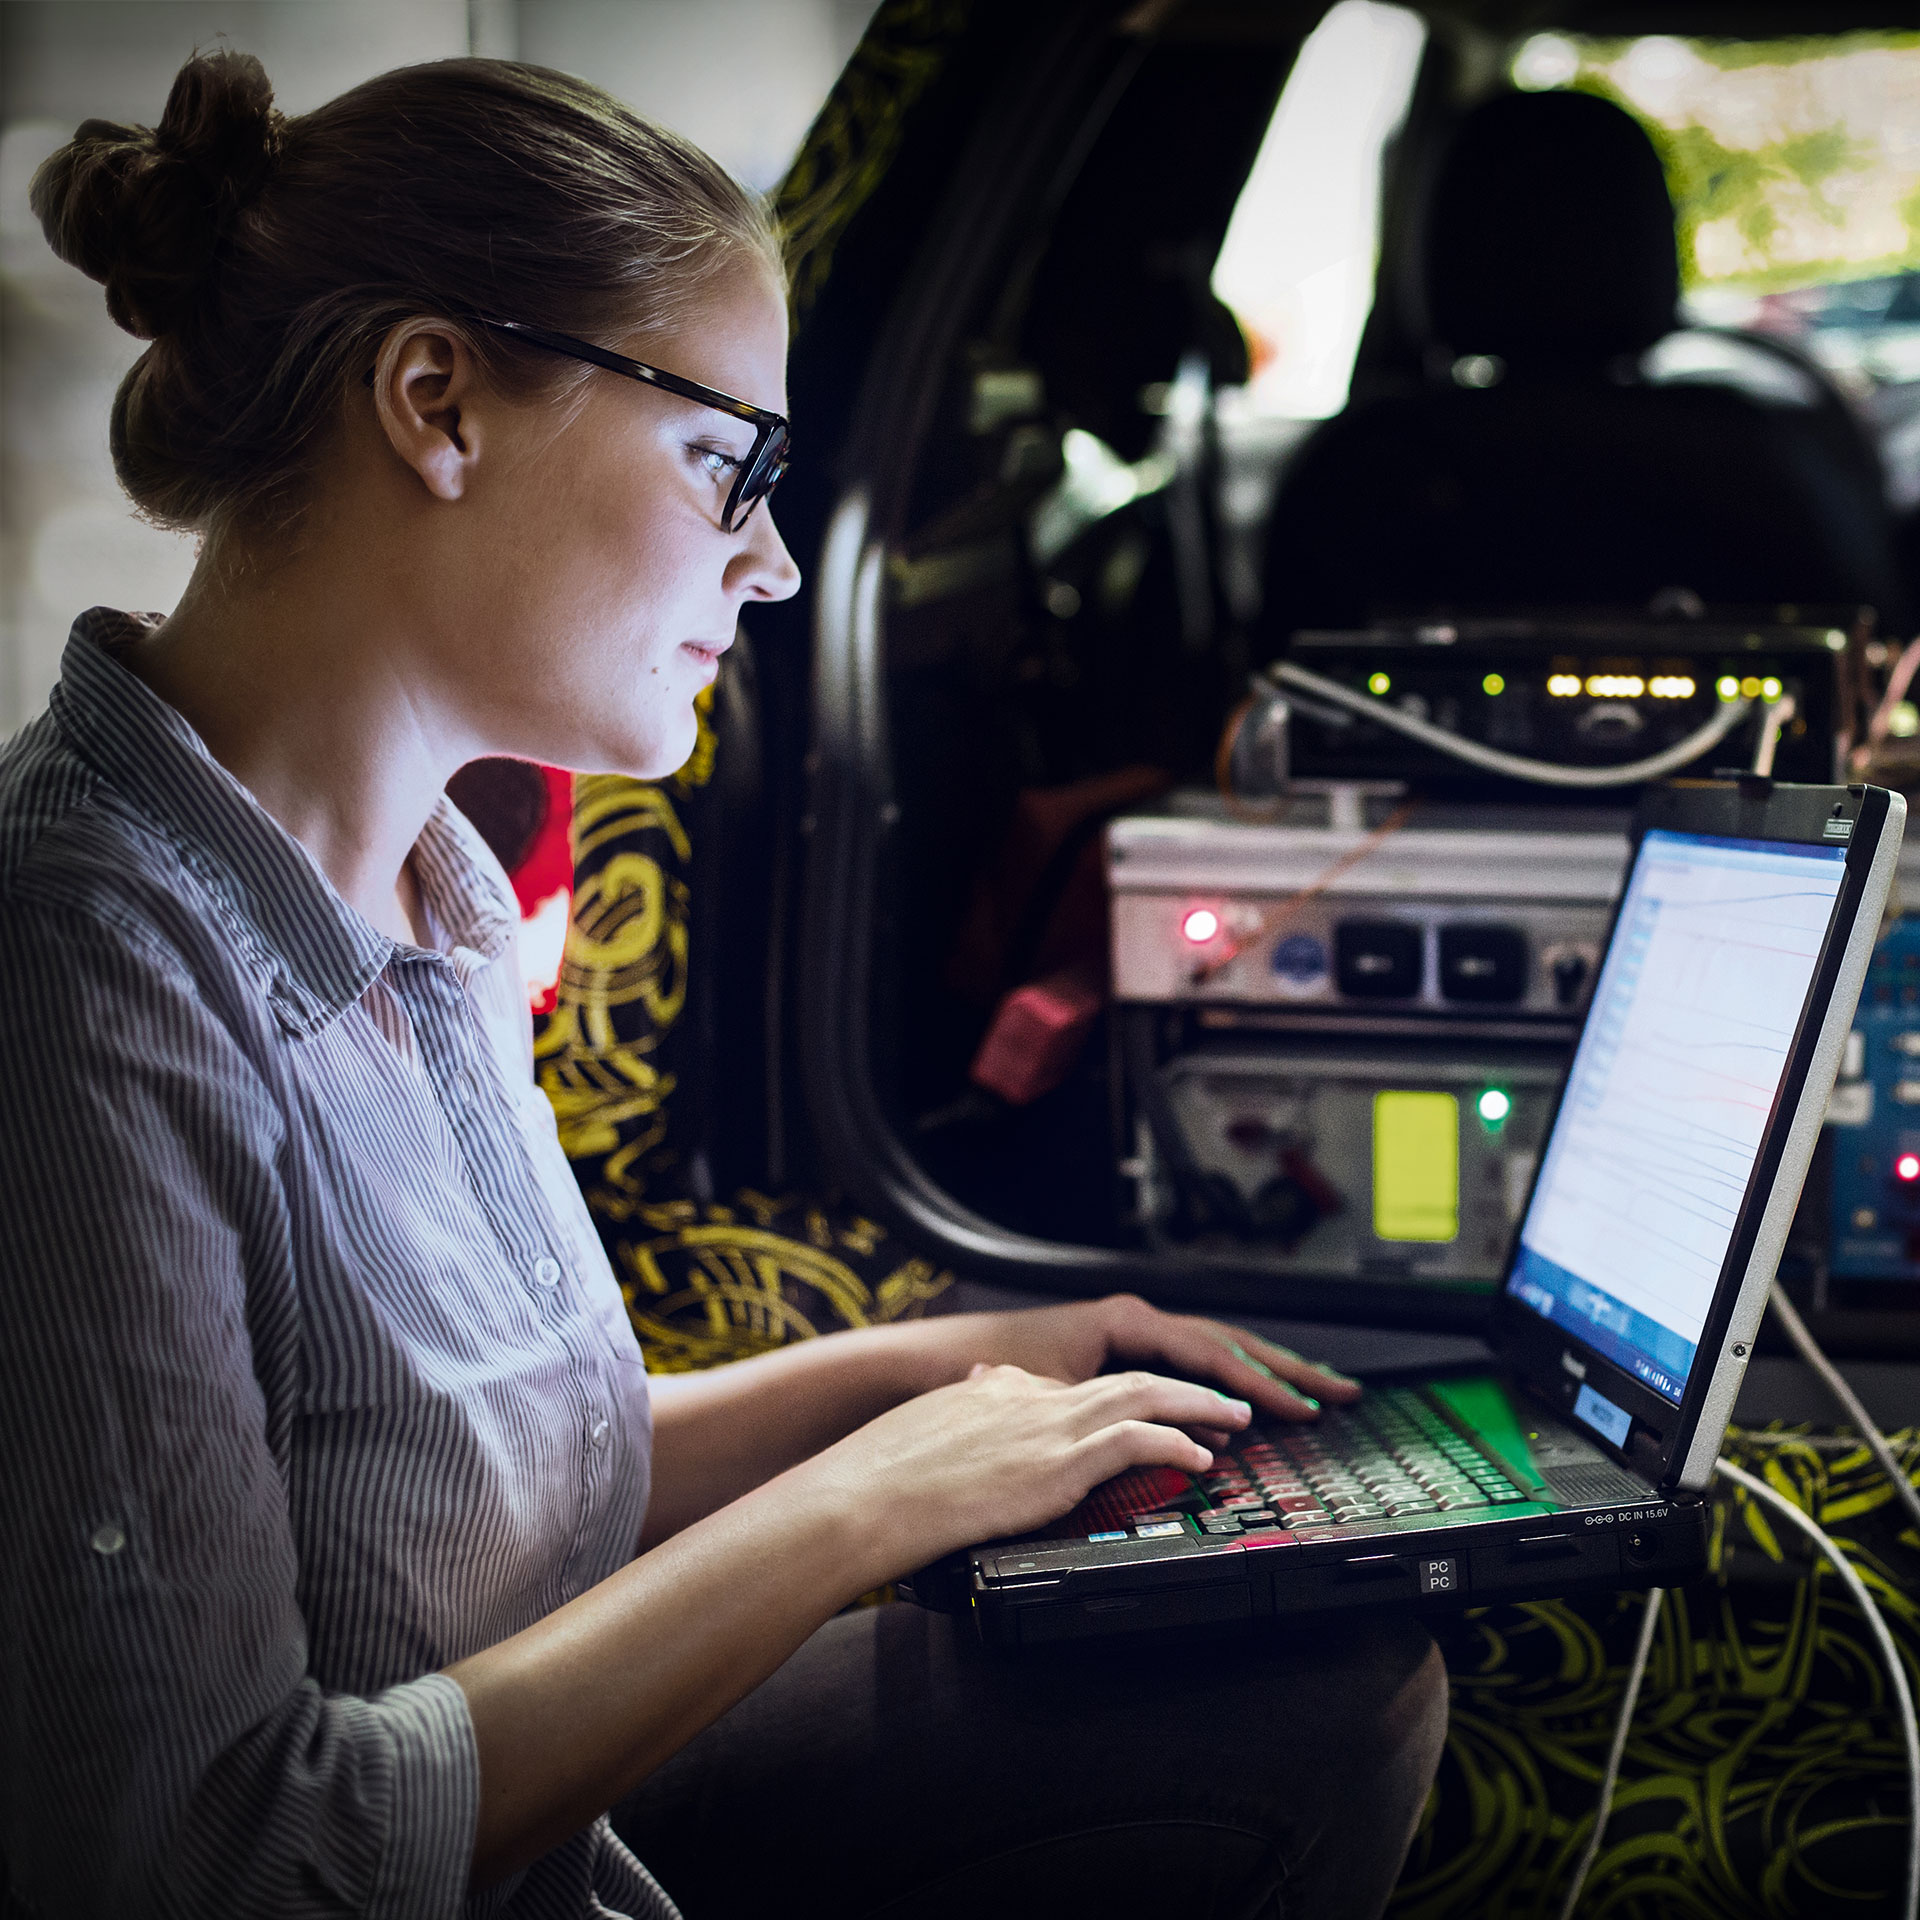 The image shows a BMW employee analying vehicle data.